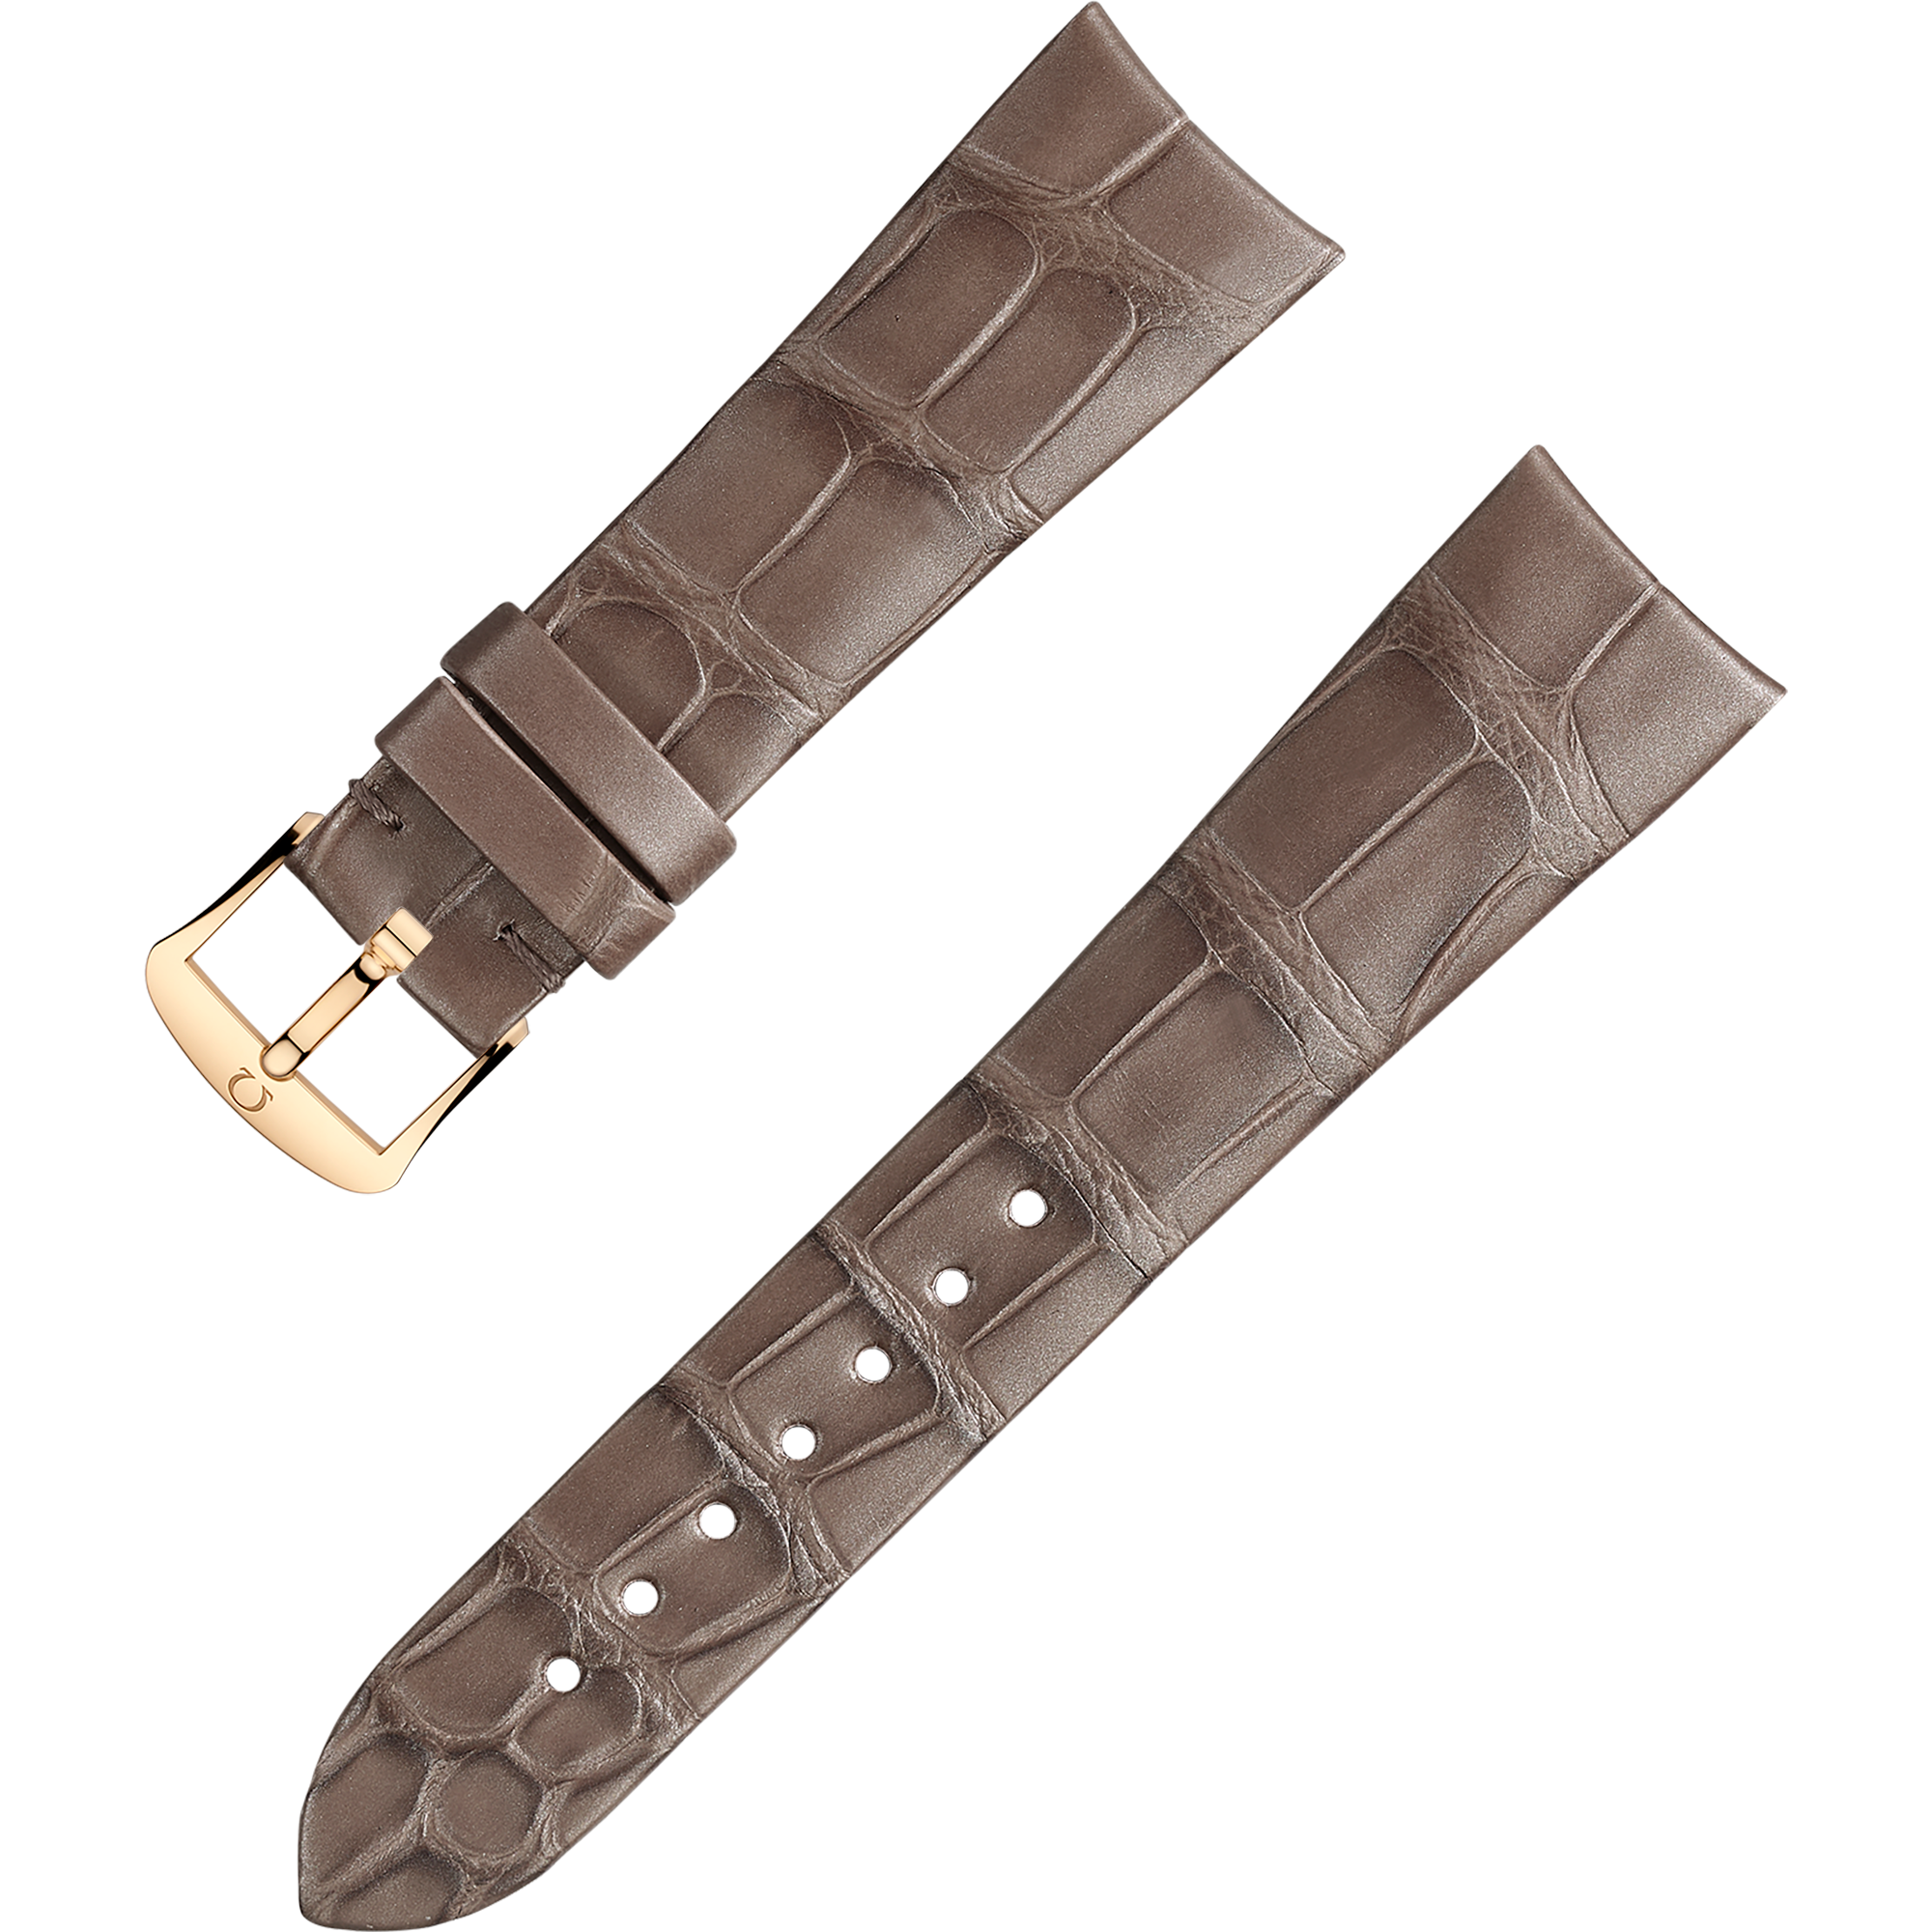 Two-piece strap - Taupe brown alligator leather strap with pin buckle - 032CUZ009874W